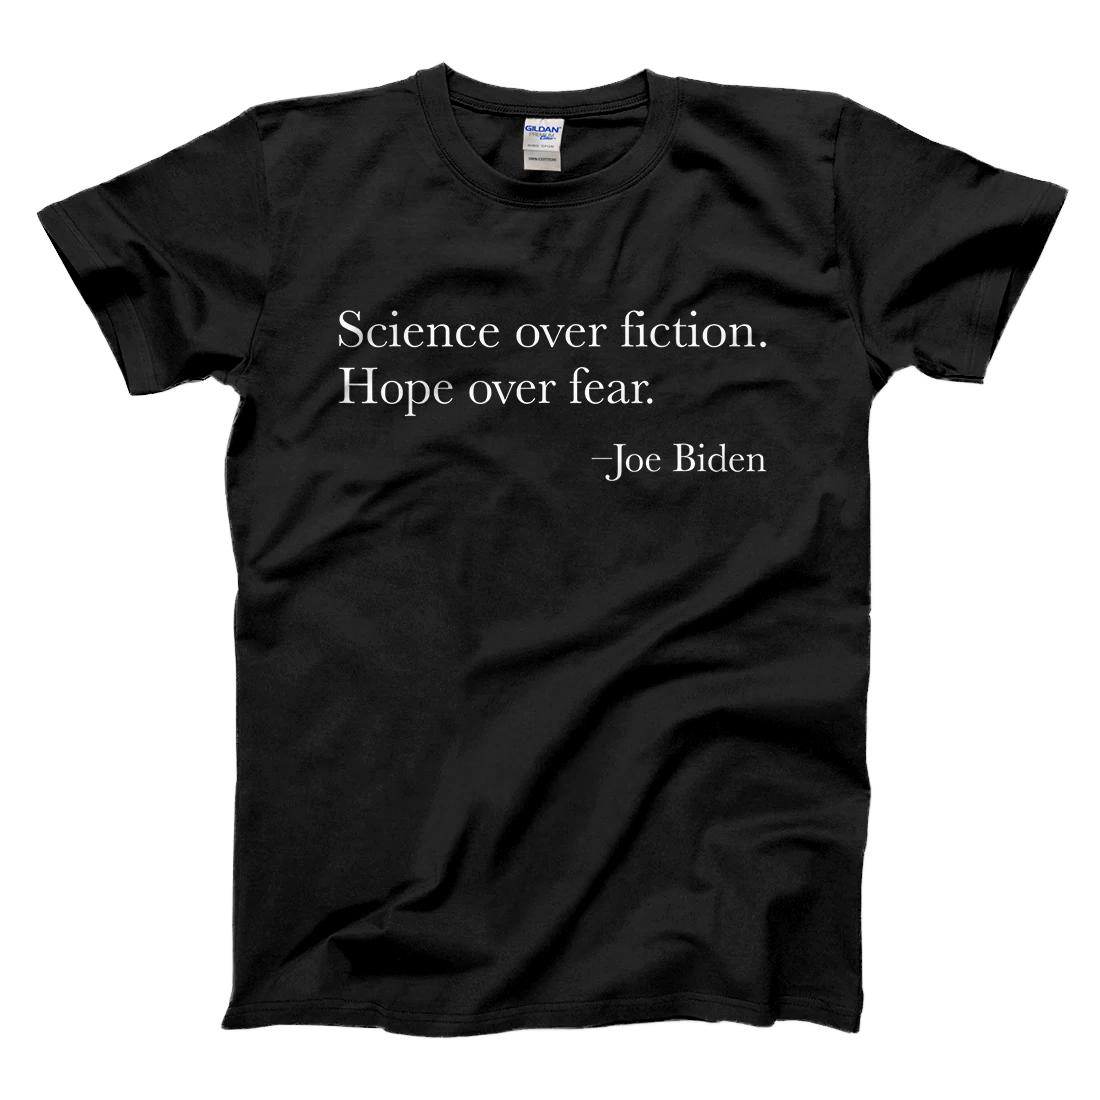 Personalized Science Over Fiction. Hope Over Fear. Joe Biden T-Shirt